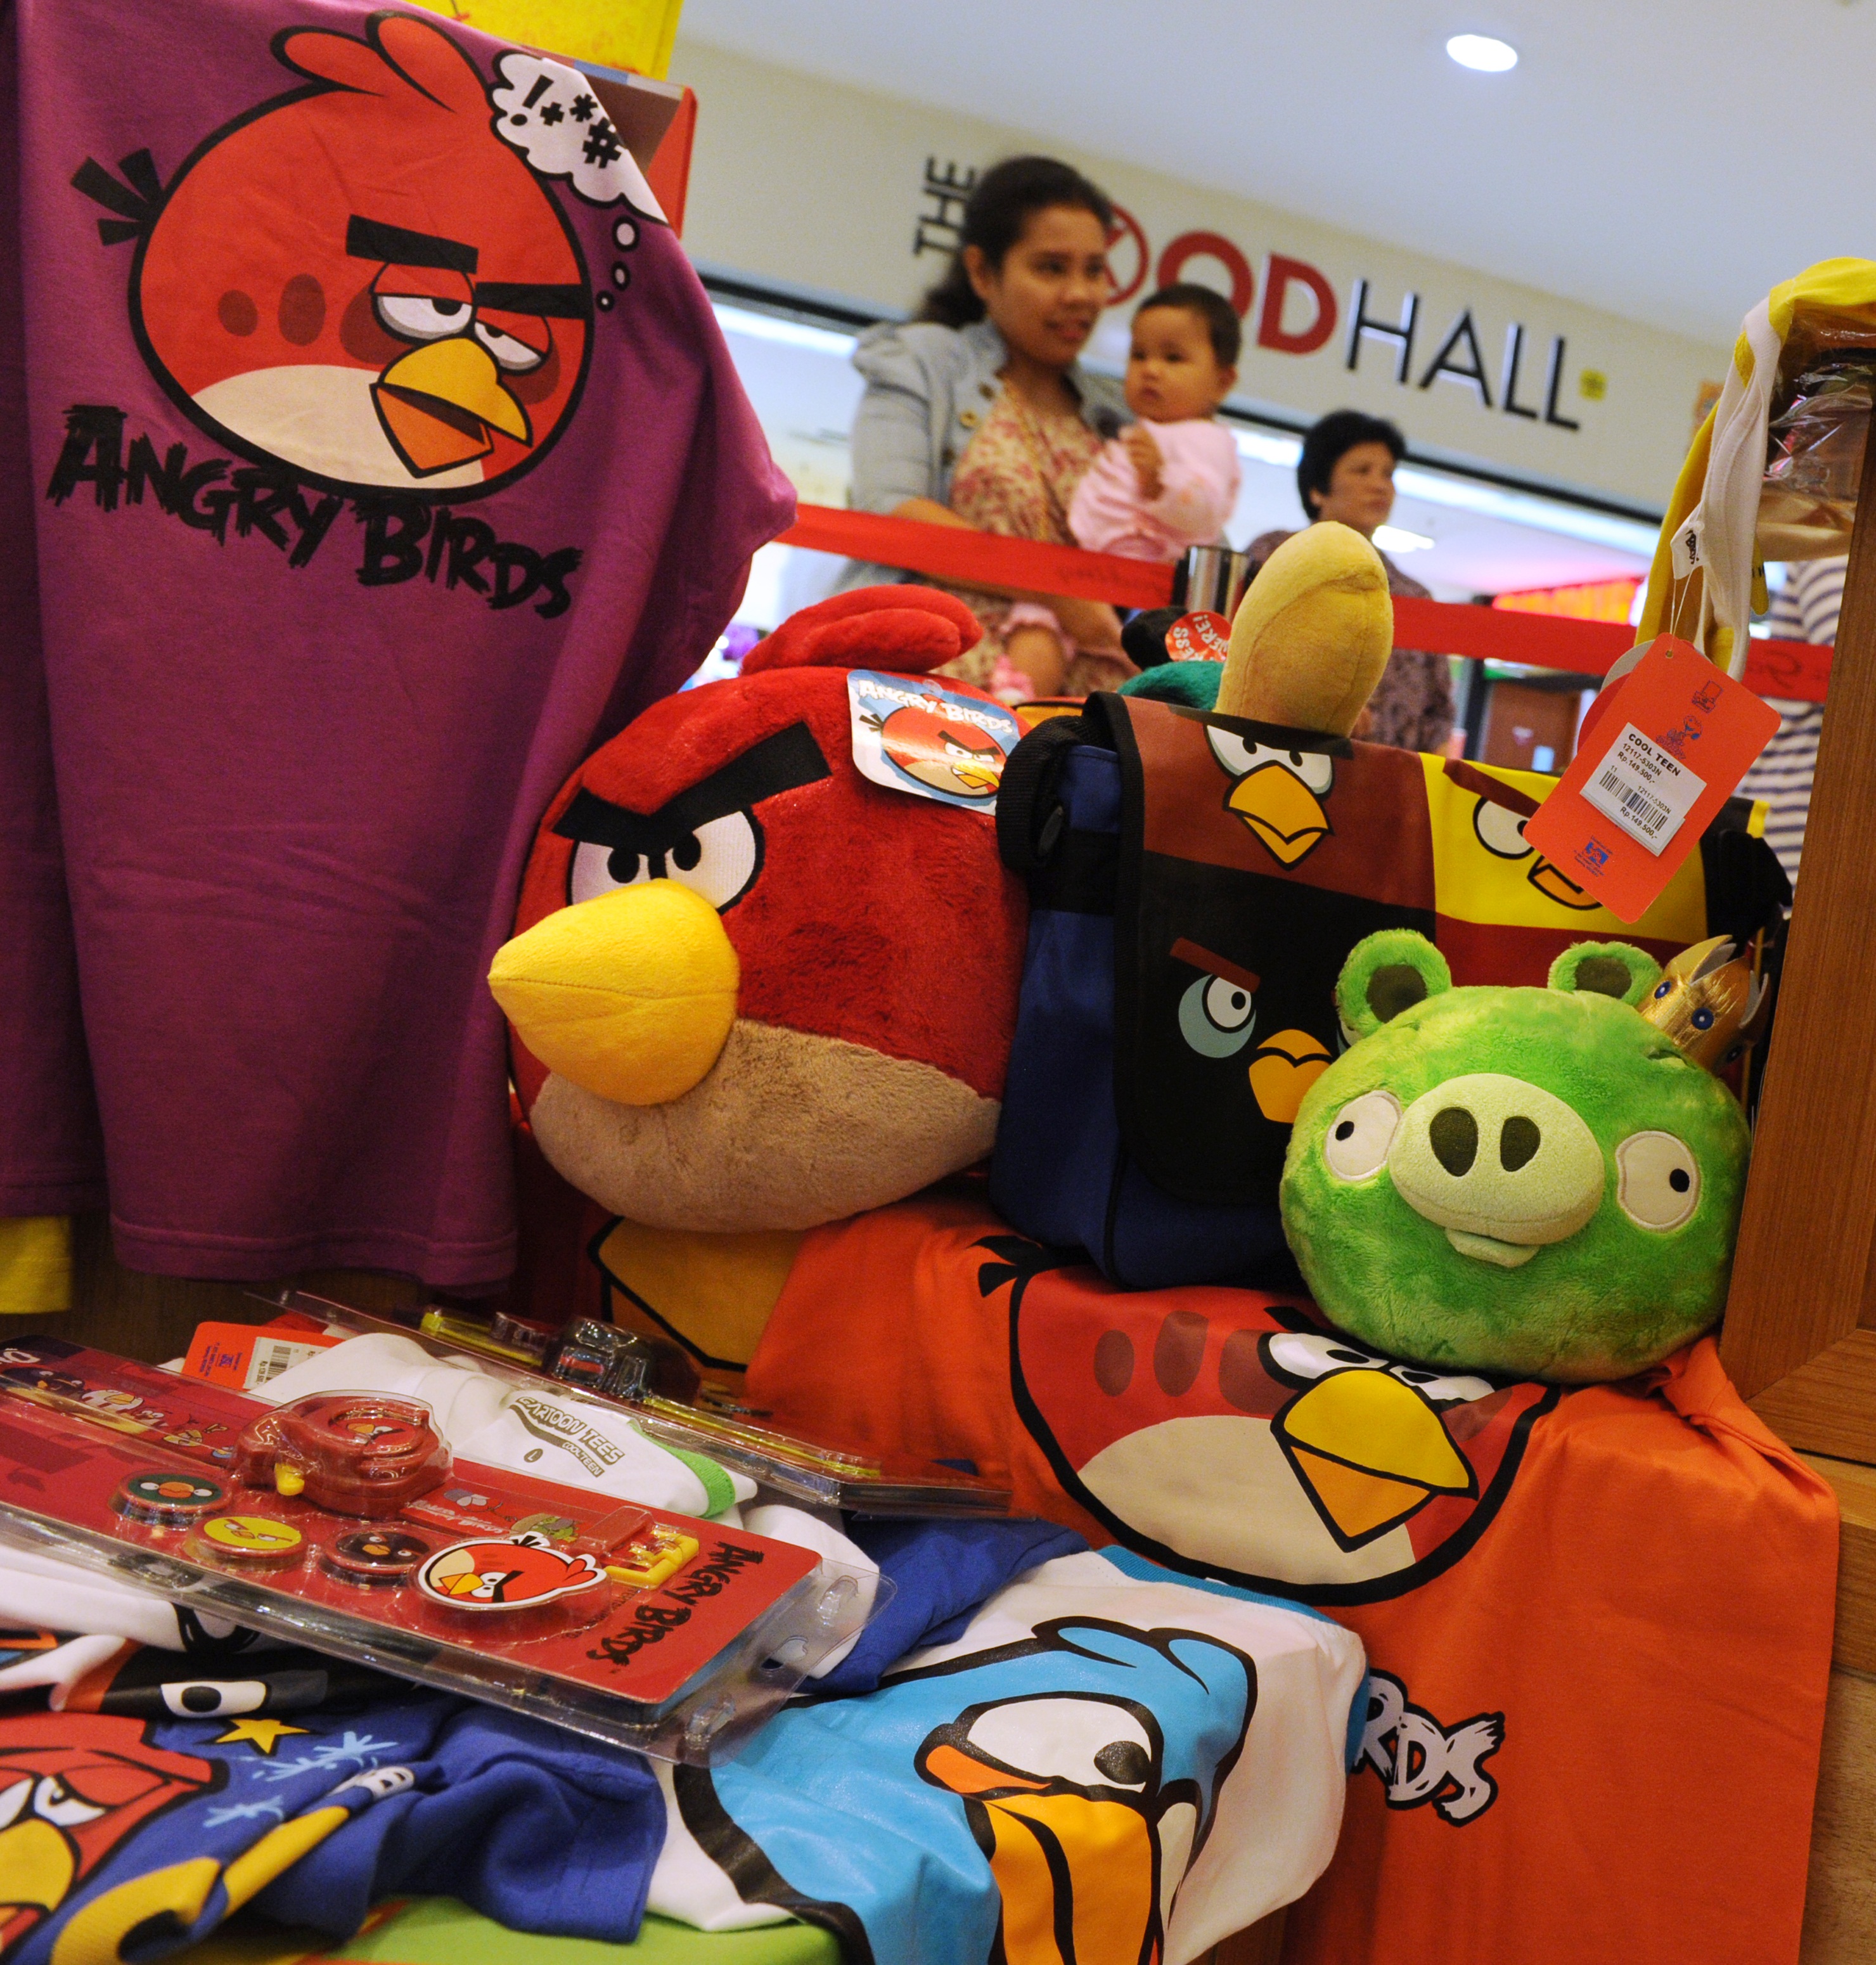 "Angry Birds" merchandise displayed in Jakarta, Indonesia in 2012. (Romeo Gacad—AFP/Getty Images)